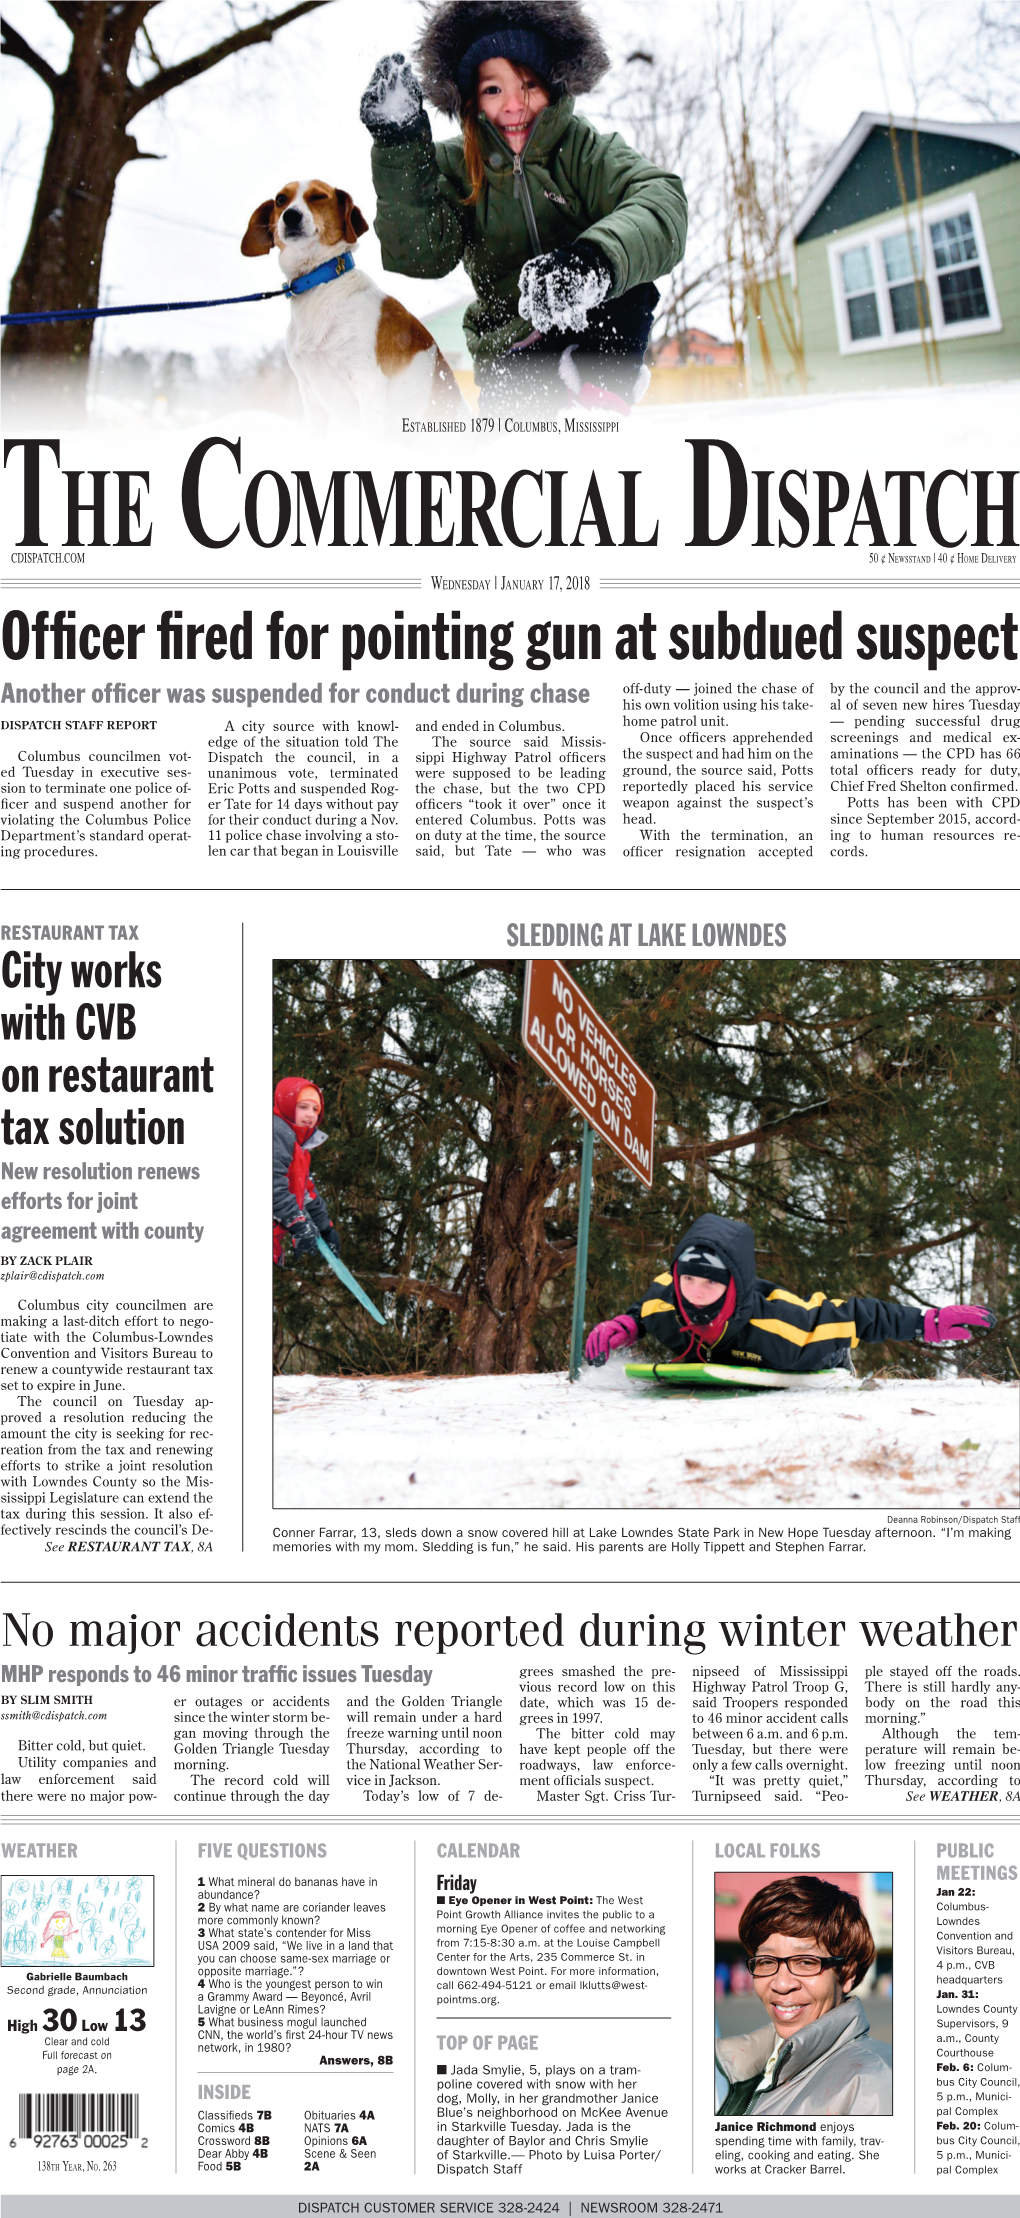 Officer Fired for Pointing Gun at Subdued Suspect